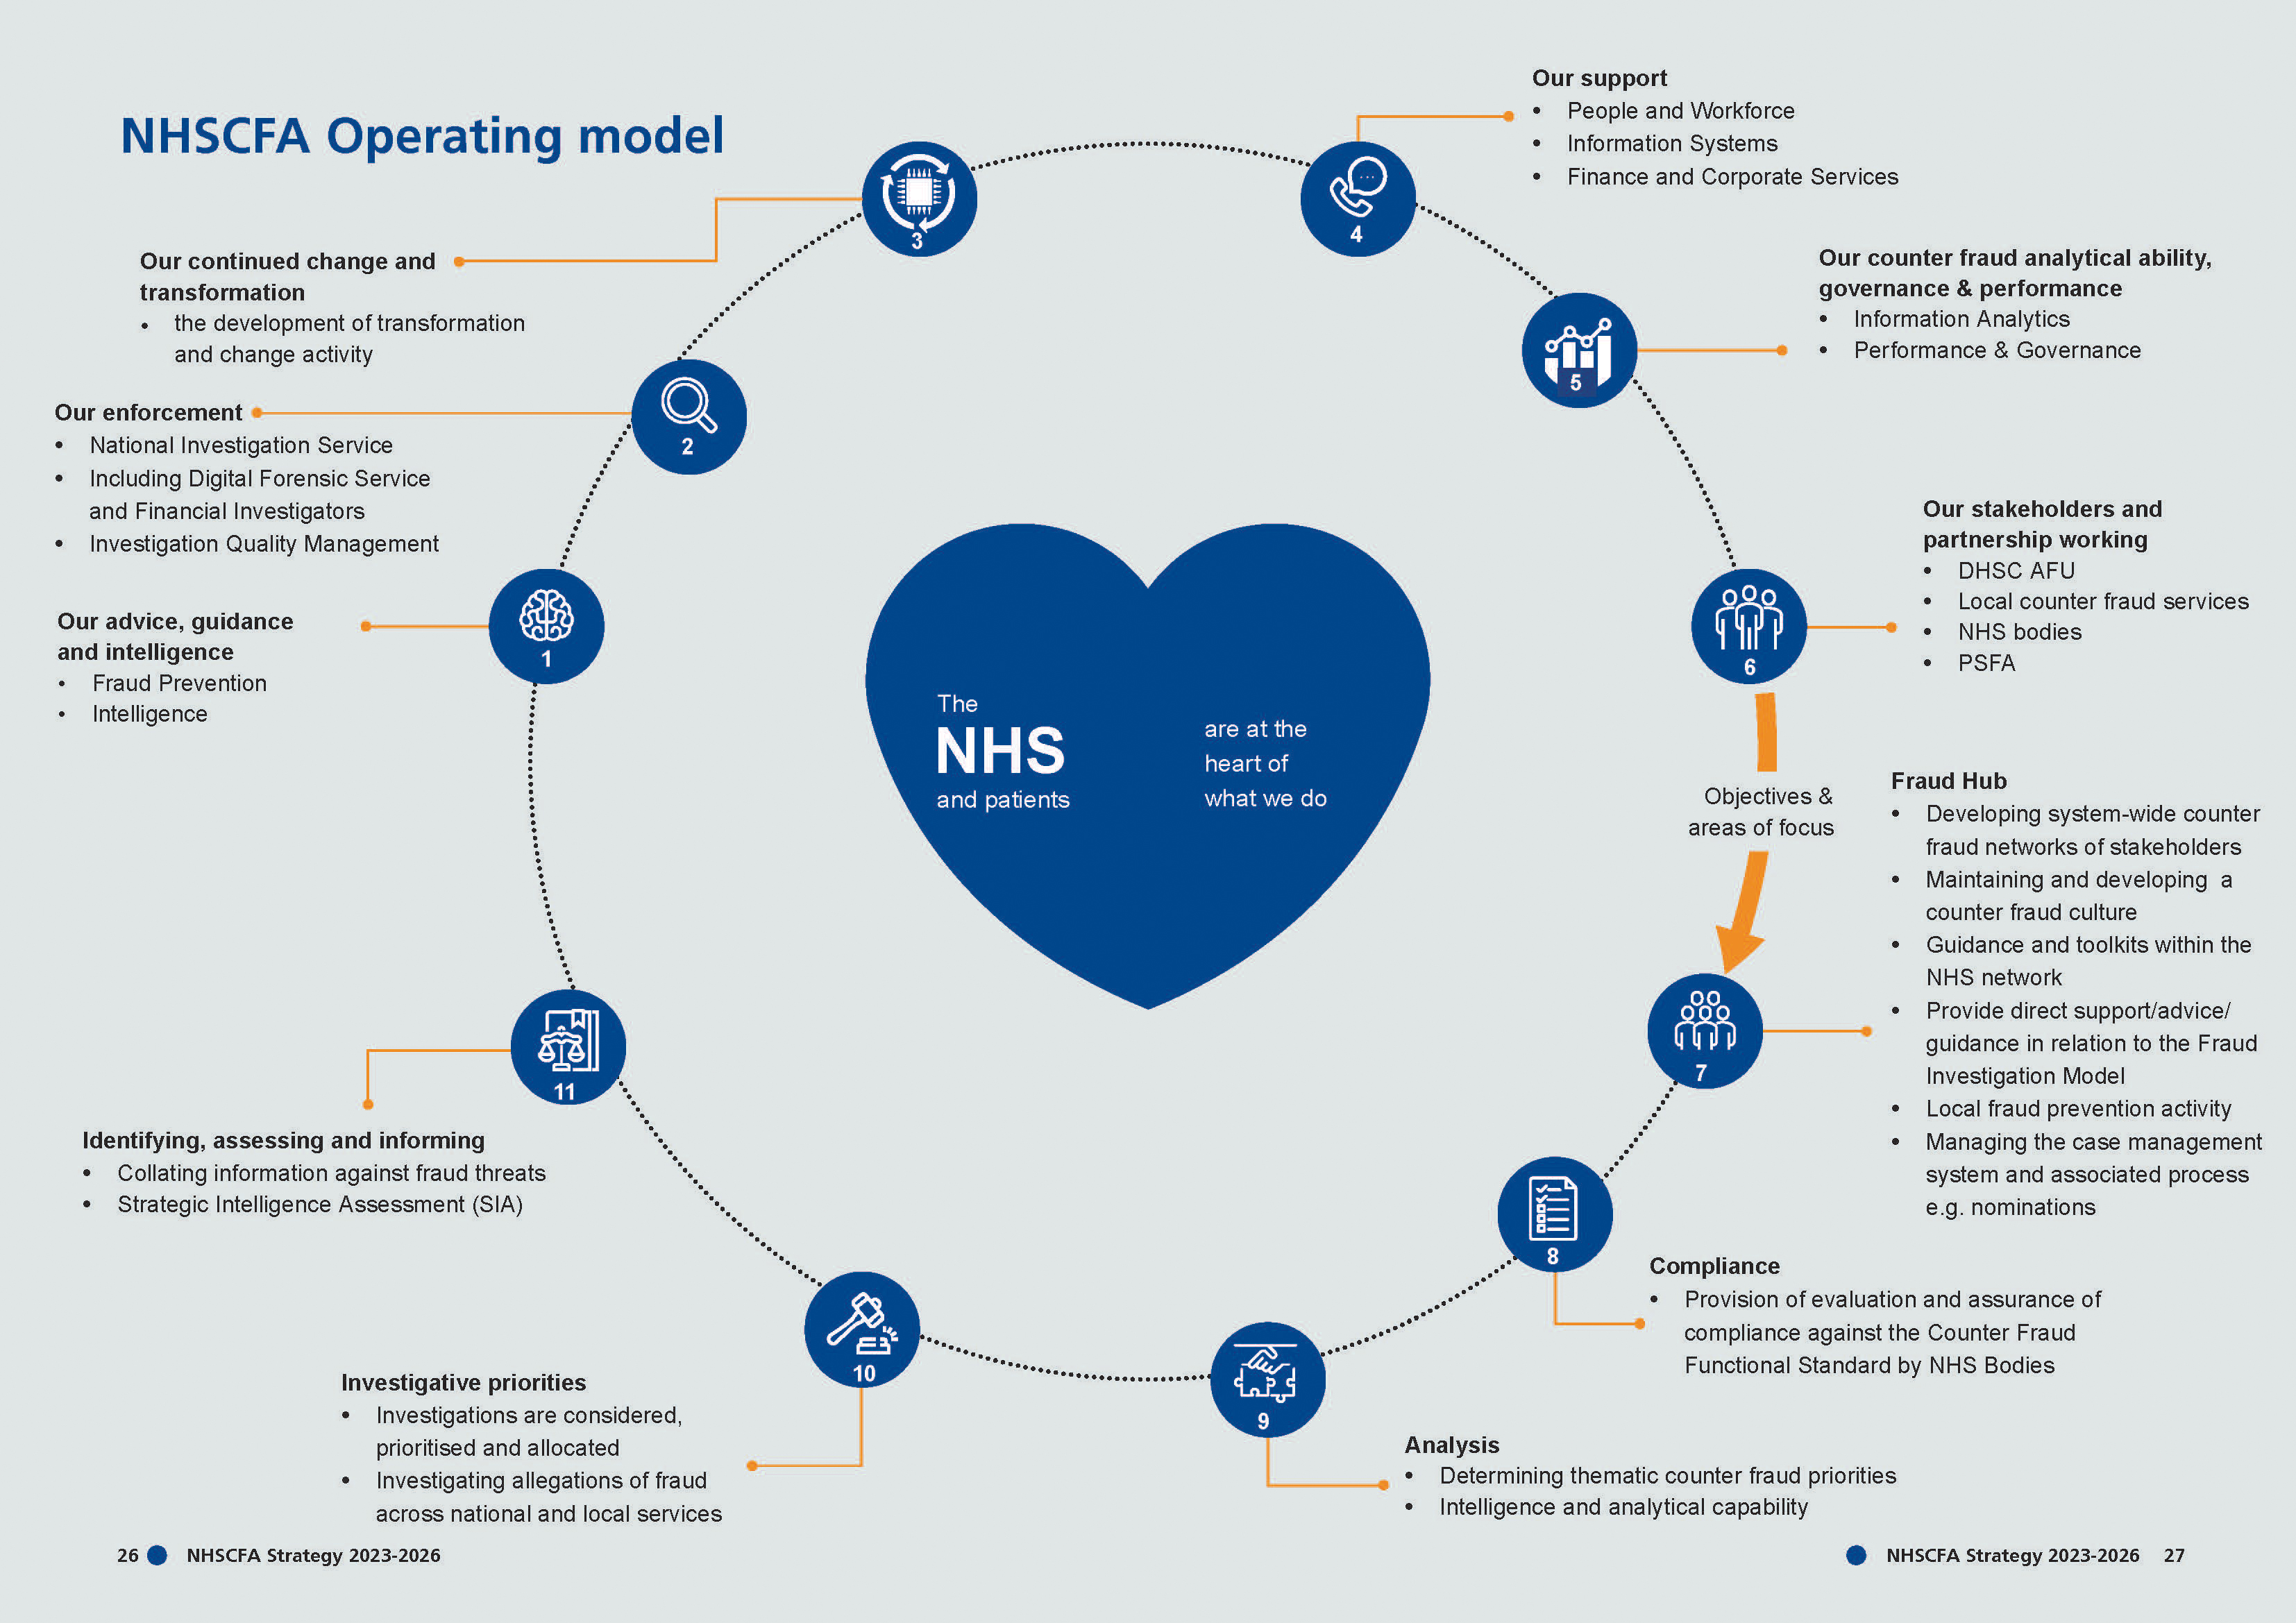 diagram of the NHSCFA's operating model